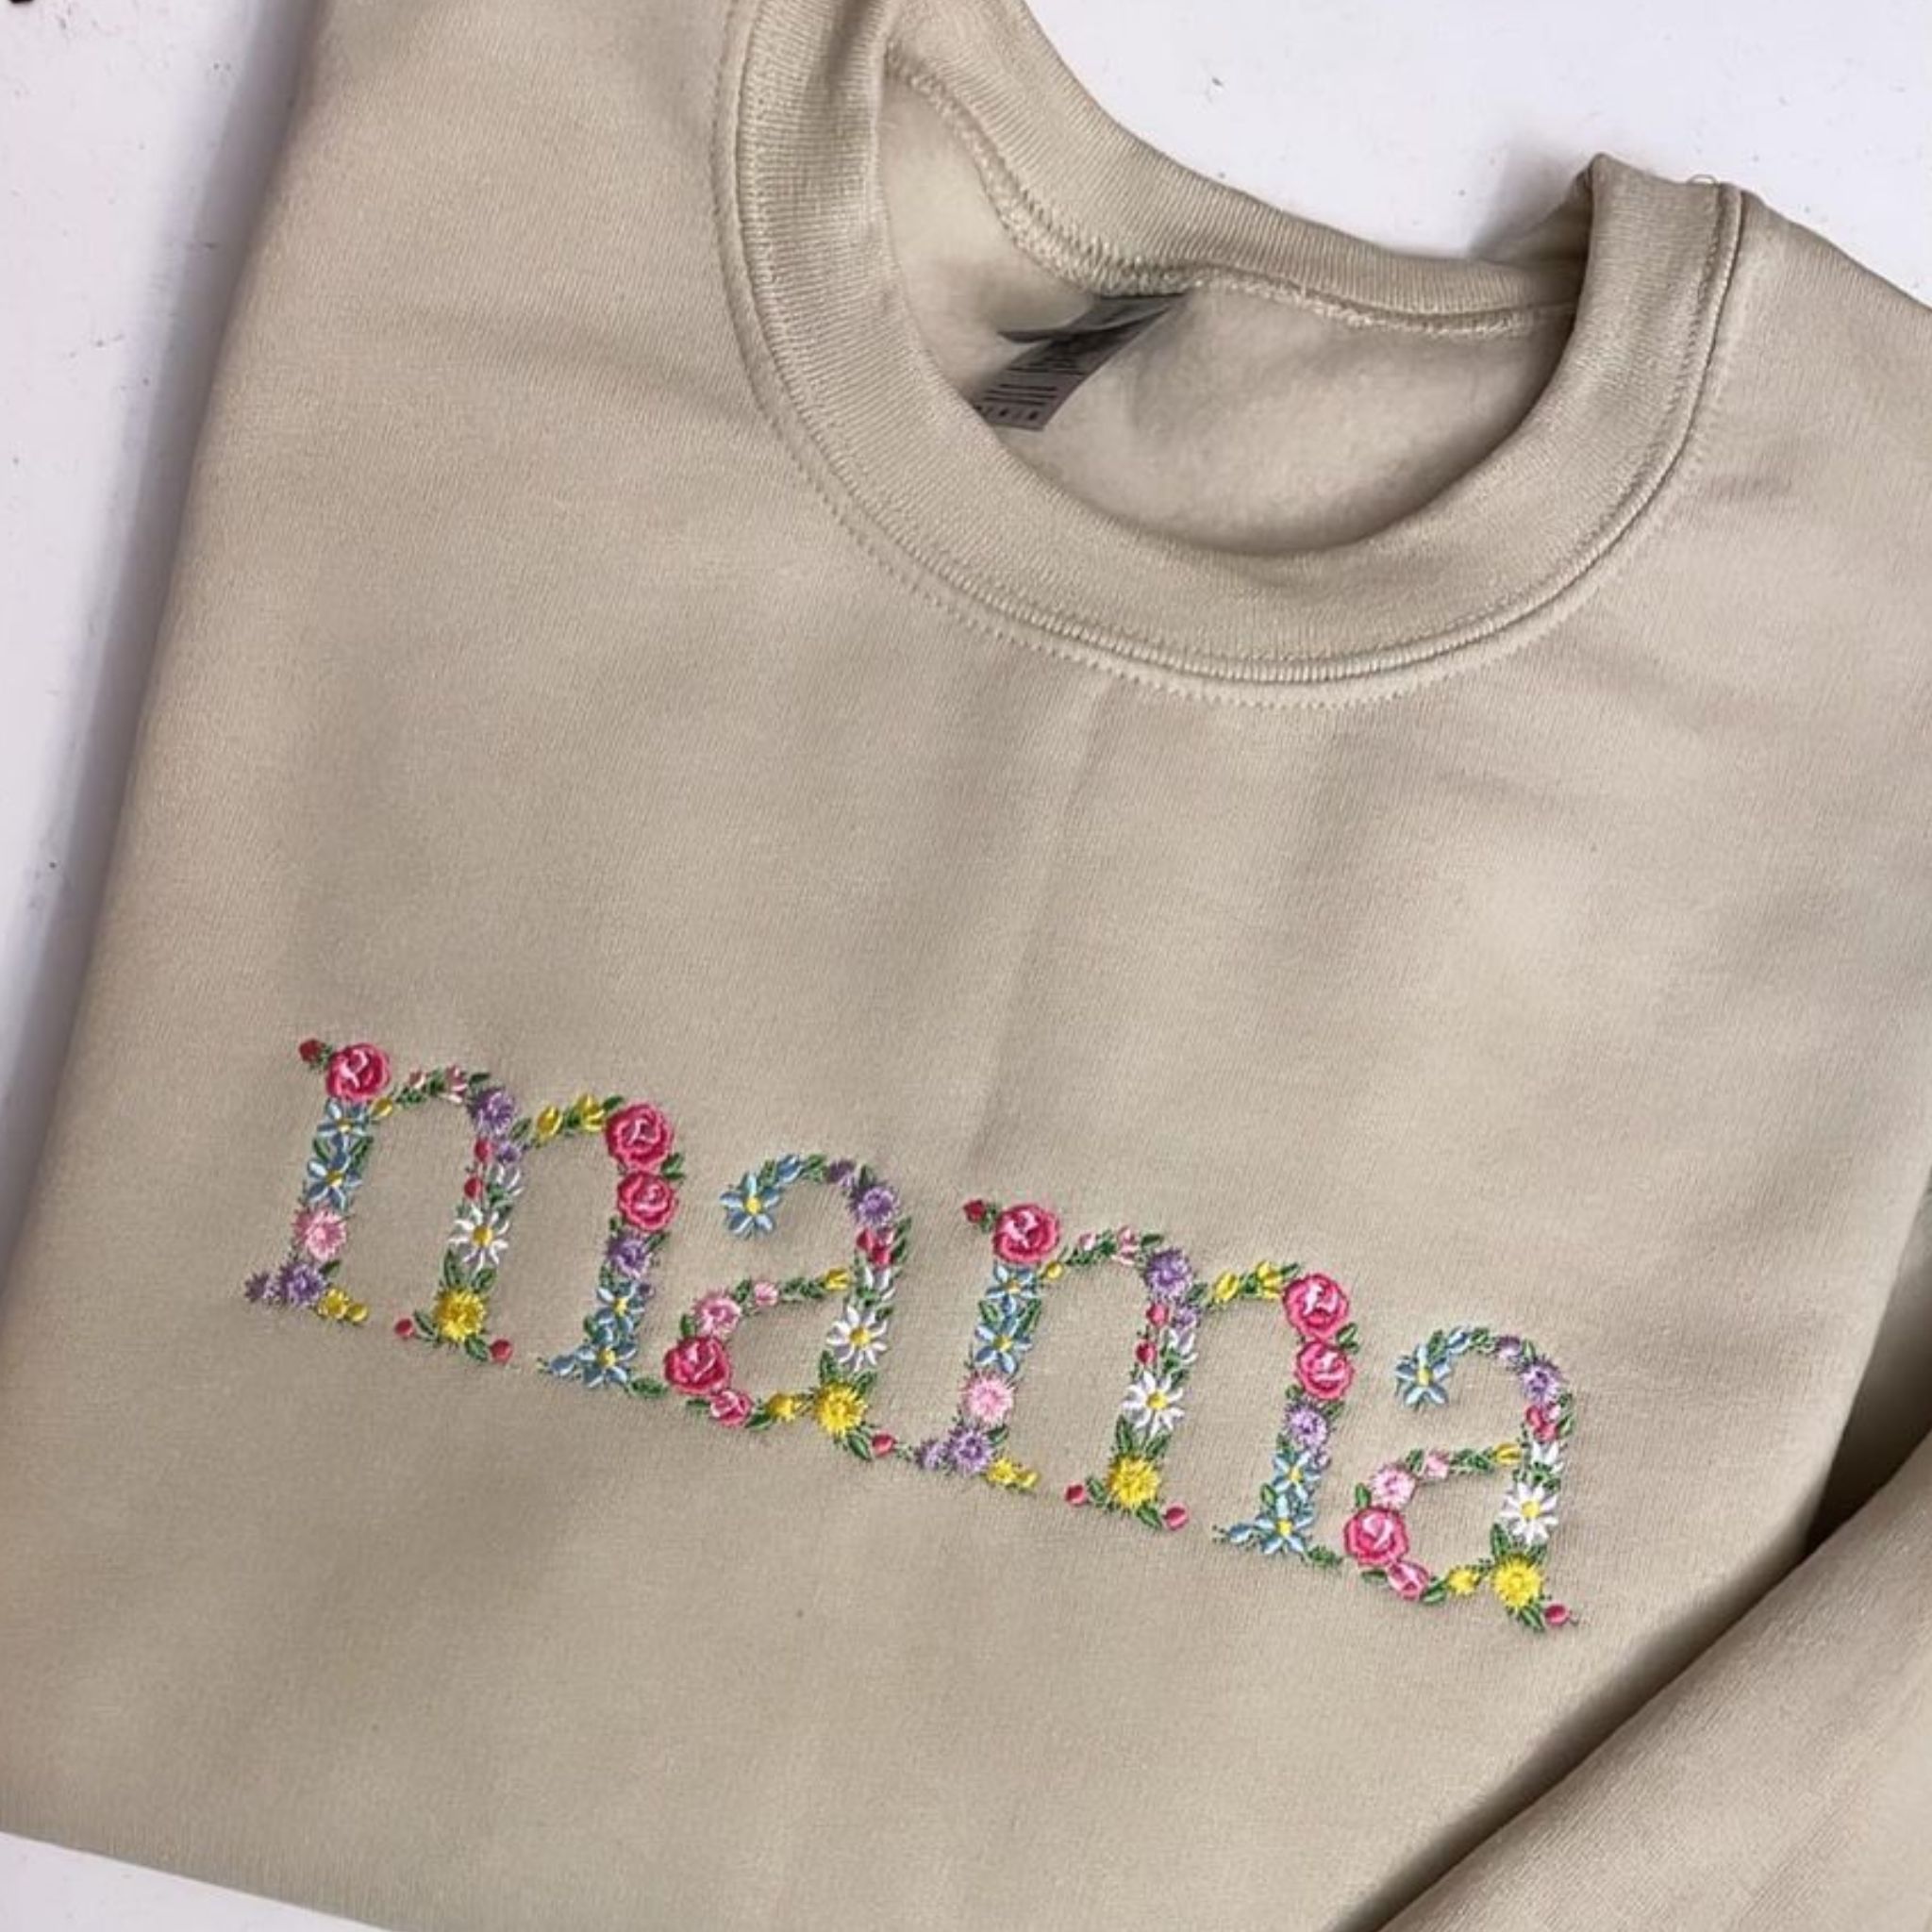 Custom Embroidered Mama Sweatshirt With Simple Embroidery Flower, Best Gift  For Mom, Personalized Sweatshirt With Initial On Sleeve - Embroly